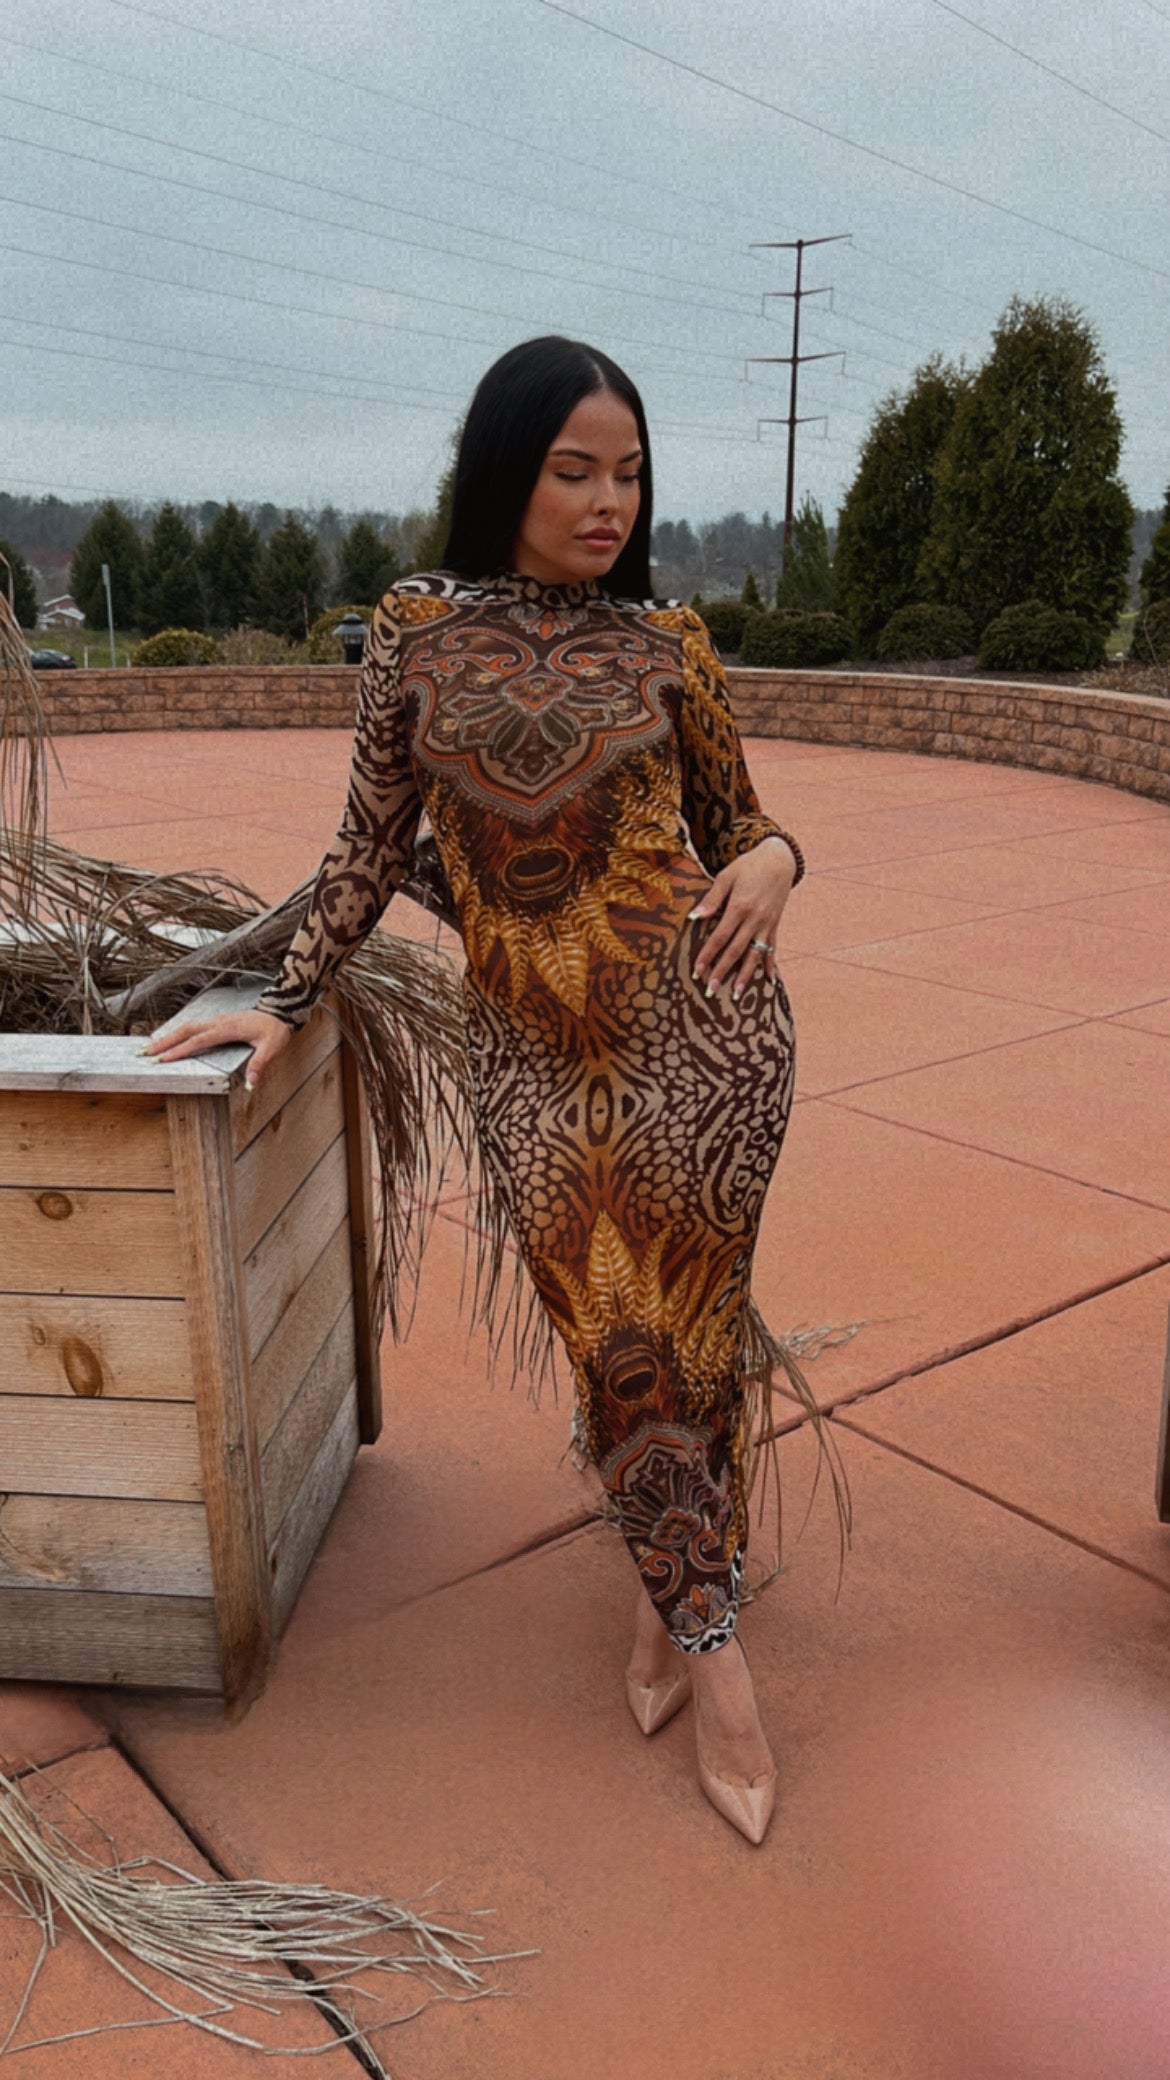 “THE UNCAGED LIONESS” mesh open back tie dress